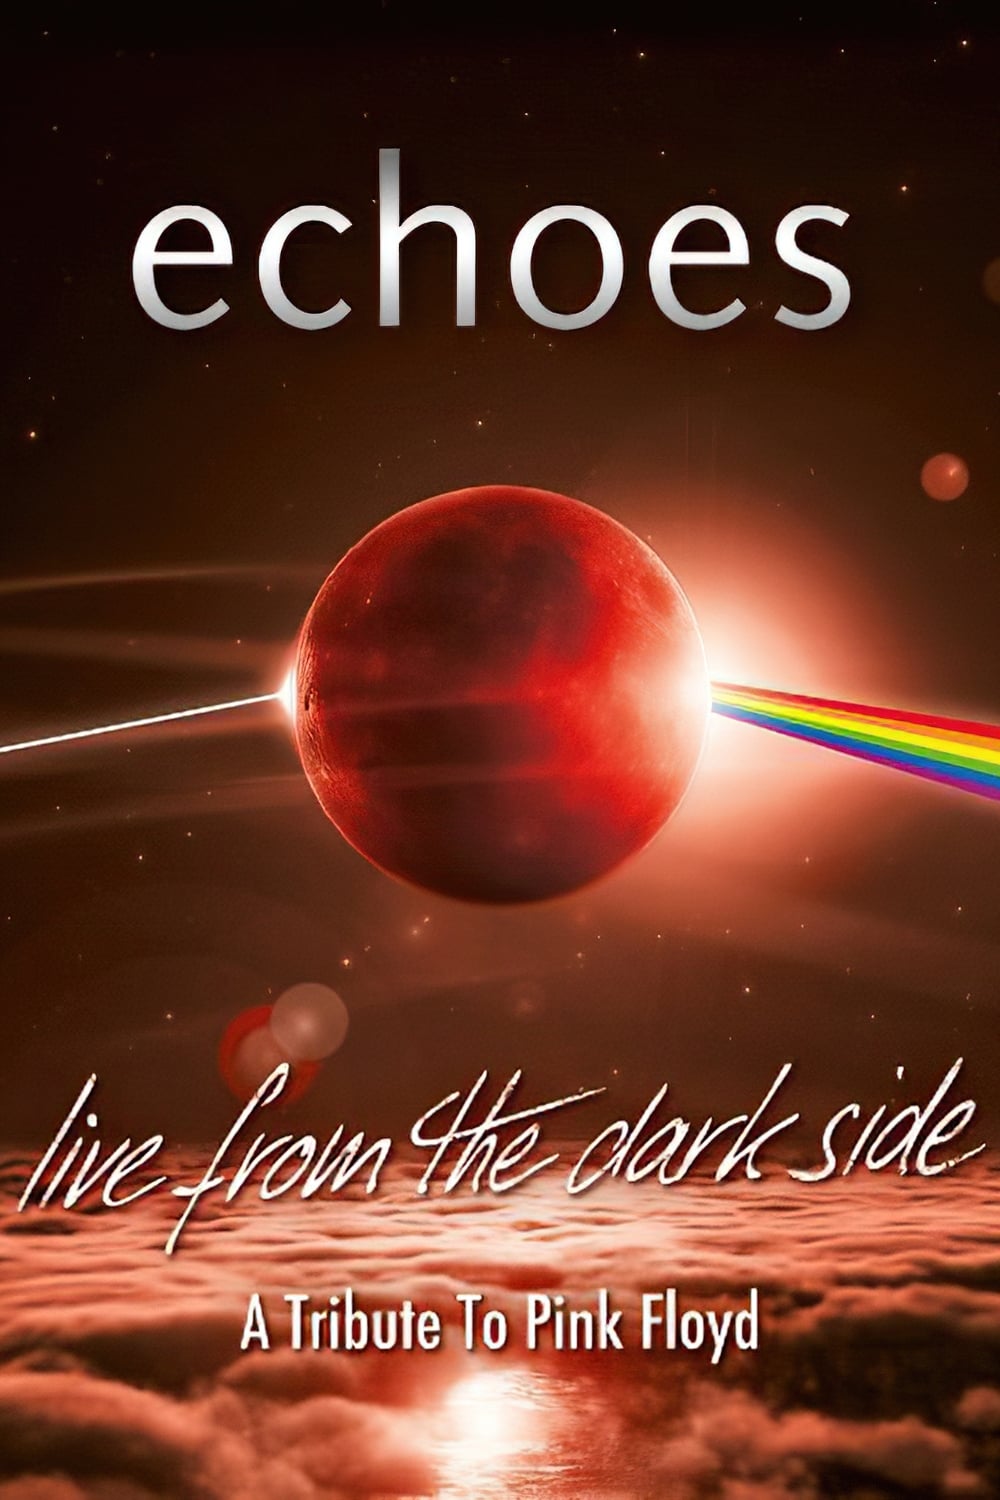 Echoes - Live From The Dark Side - A Tribute To Pink Floyd